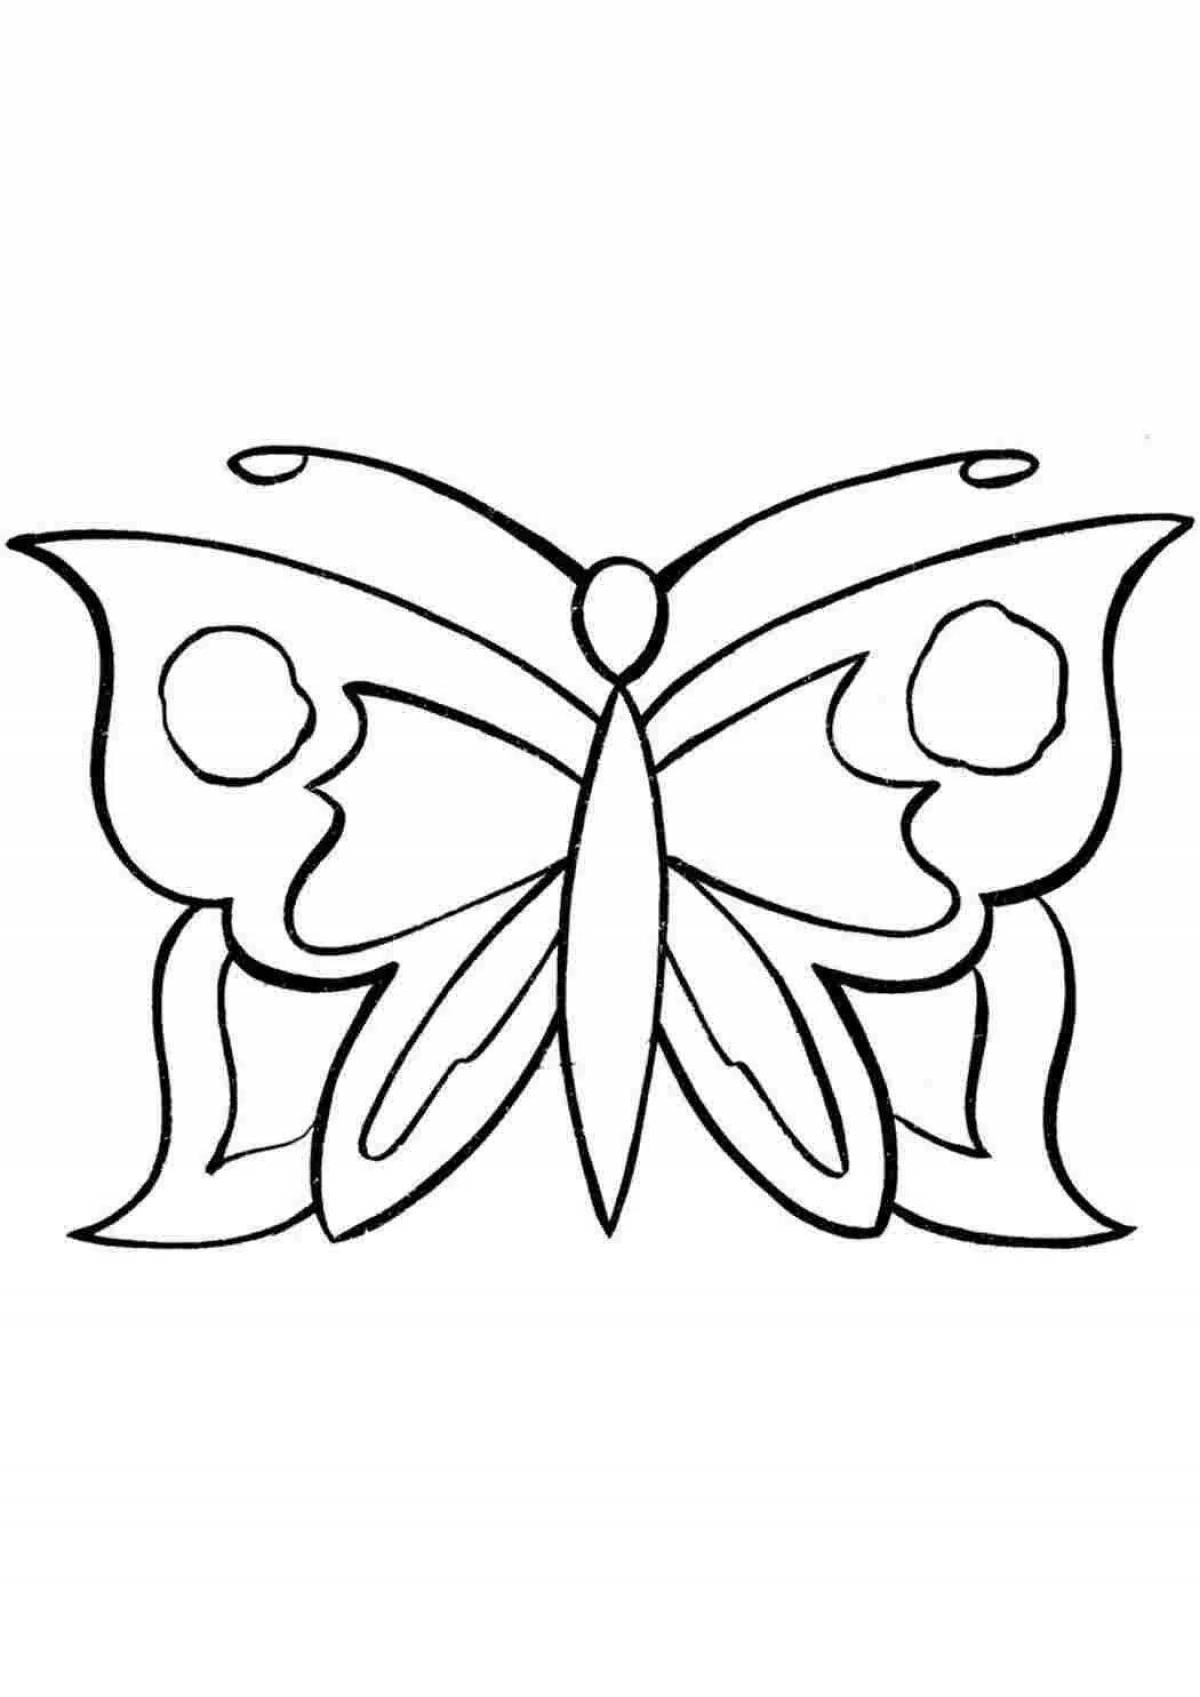 Legacy butterfly glitter coloring book